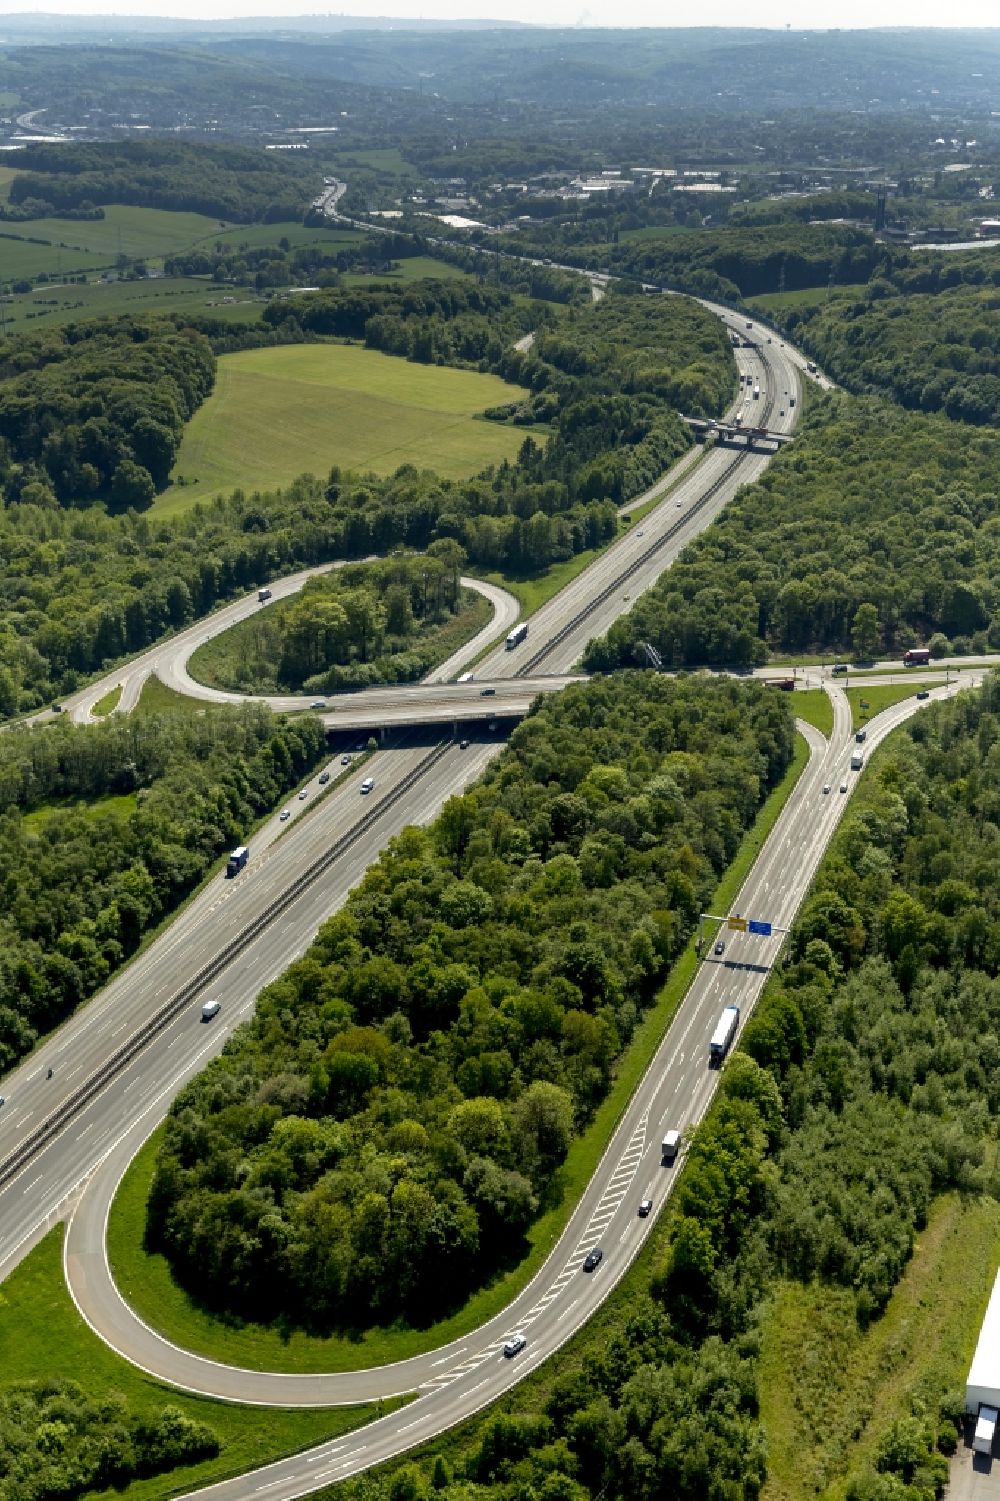 Sprockhövel from the bird's eye view: The junction between the BAB A1 motorway and A43 Wuppertal-Nord in Sprockhoevel in the state of North Rhine-Westphalia